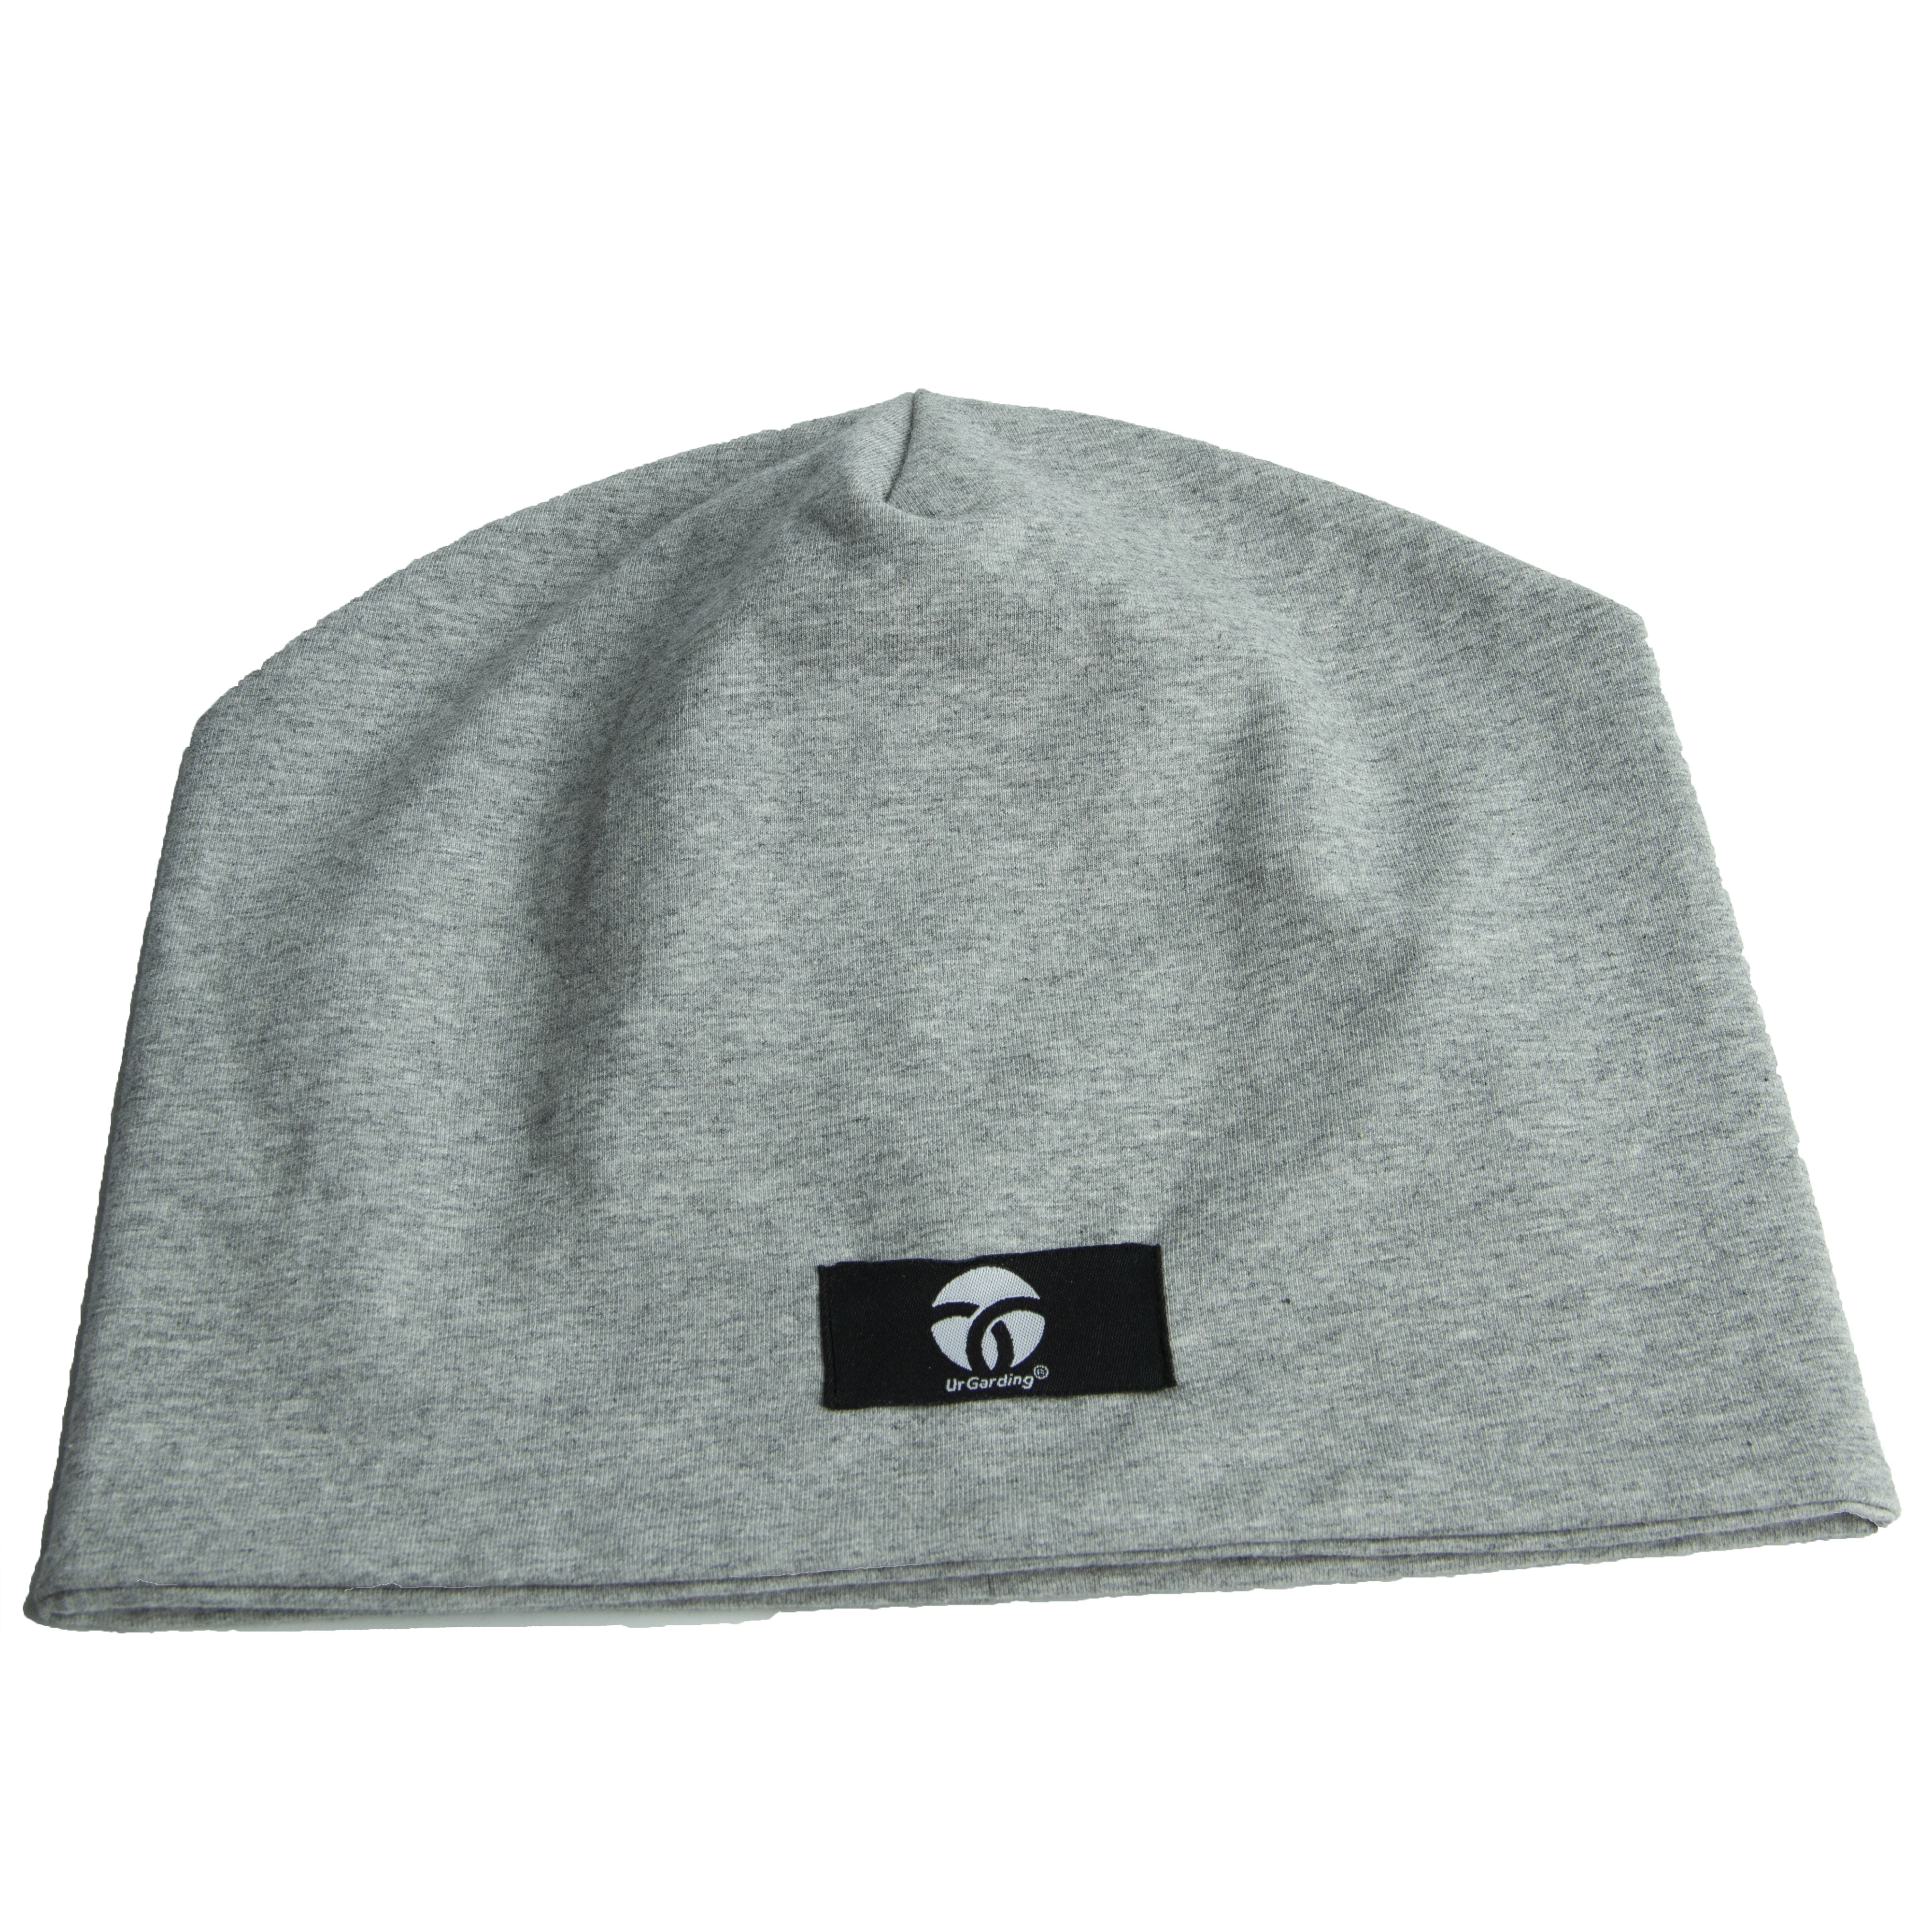 

100%Silverfiber and Cotton Emf Shielding Radiation Protection to 99.99% EMI Hat Beanie